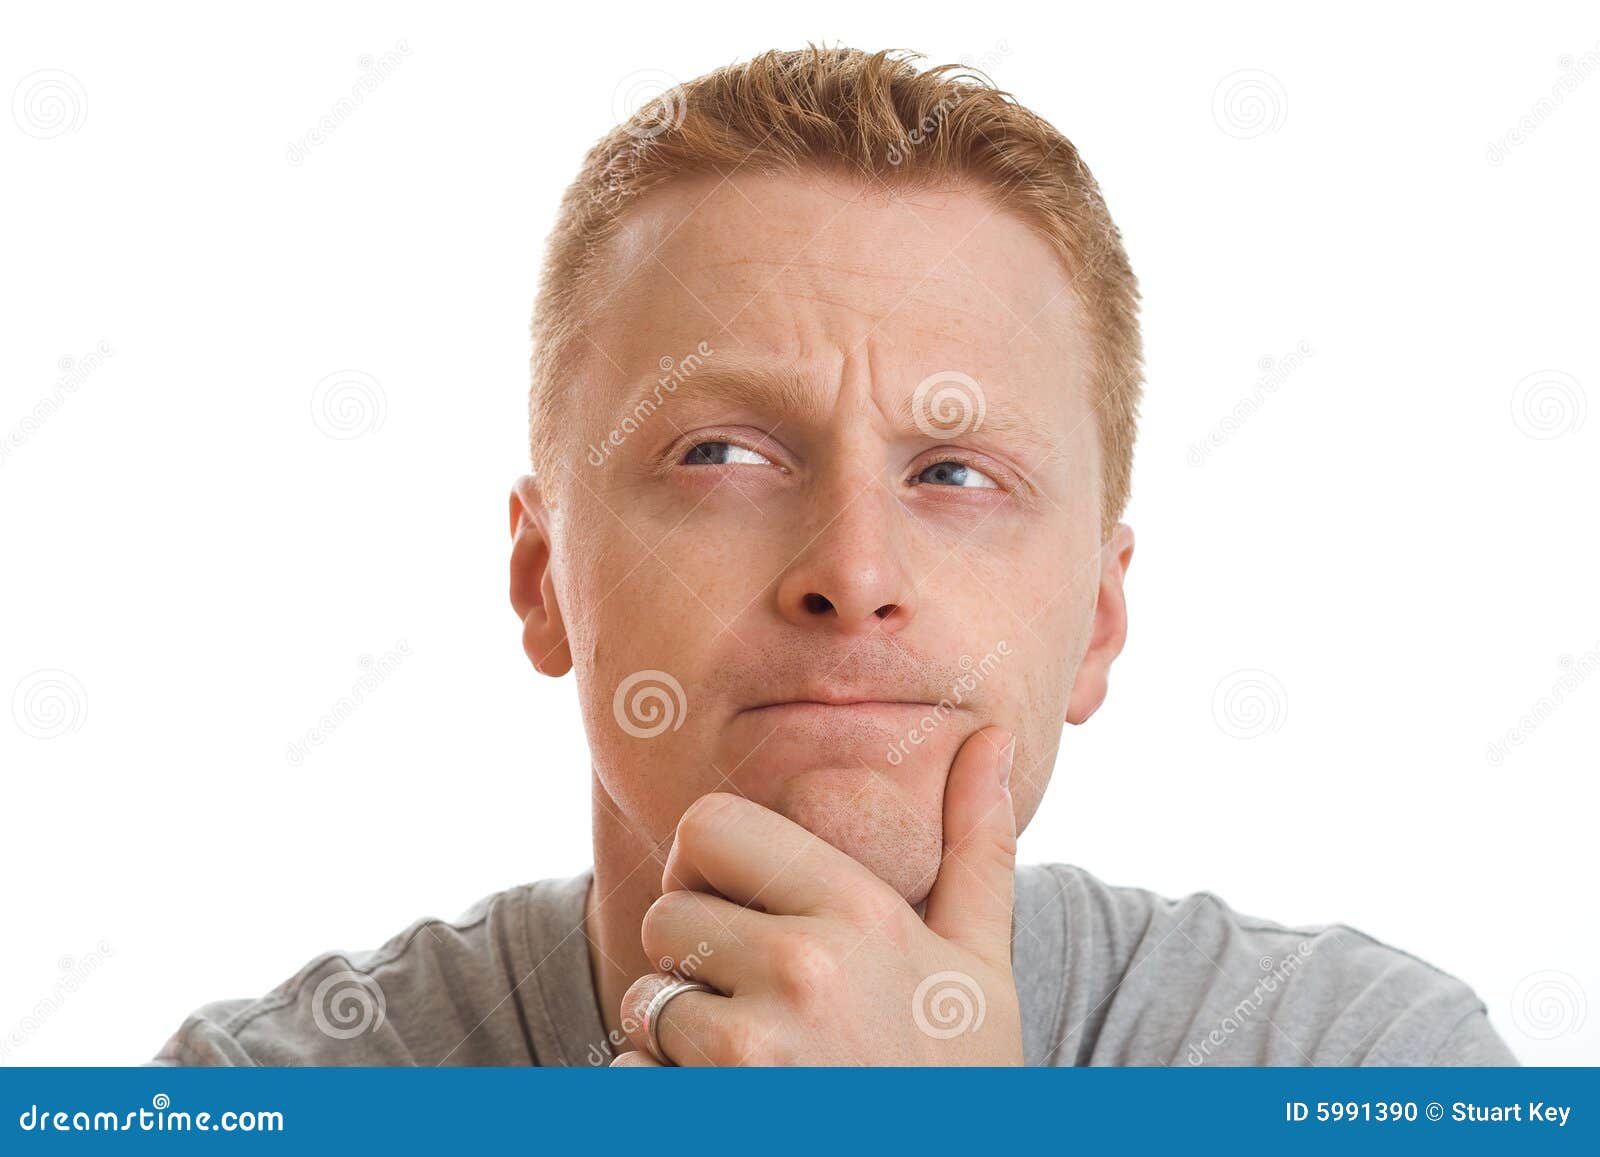 Looking Thoughtful Stock Photo - Image: 5991390
